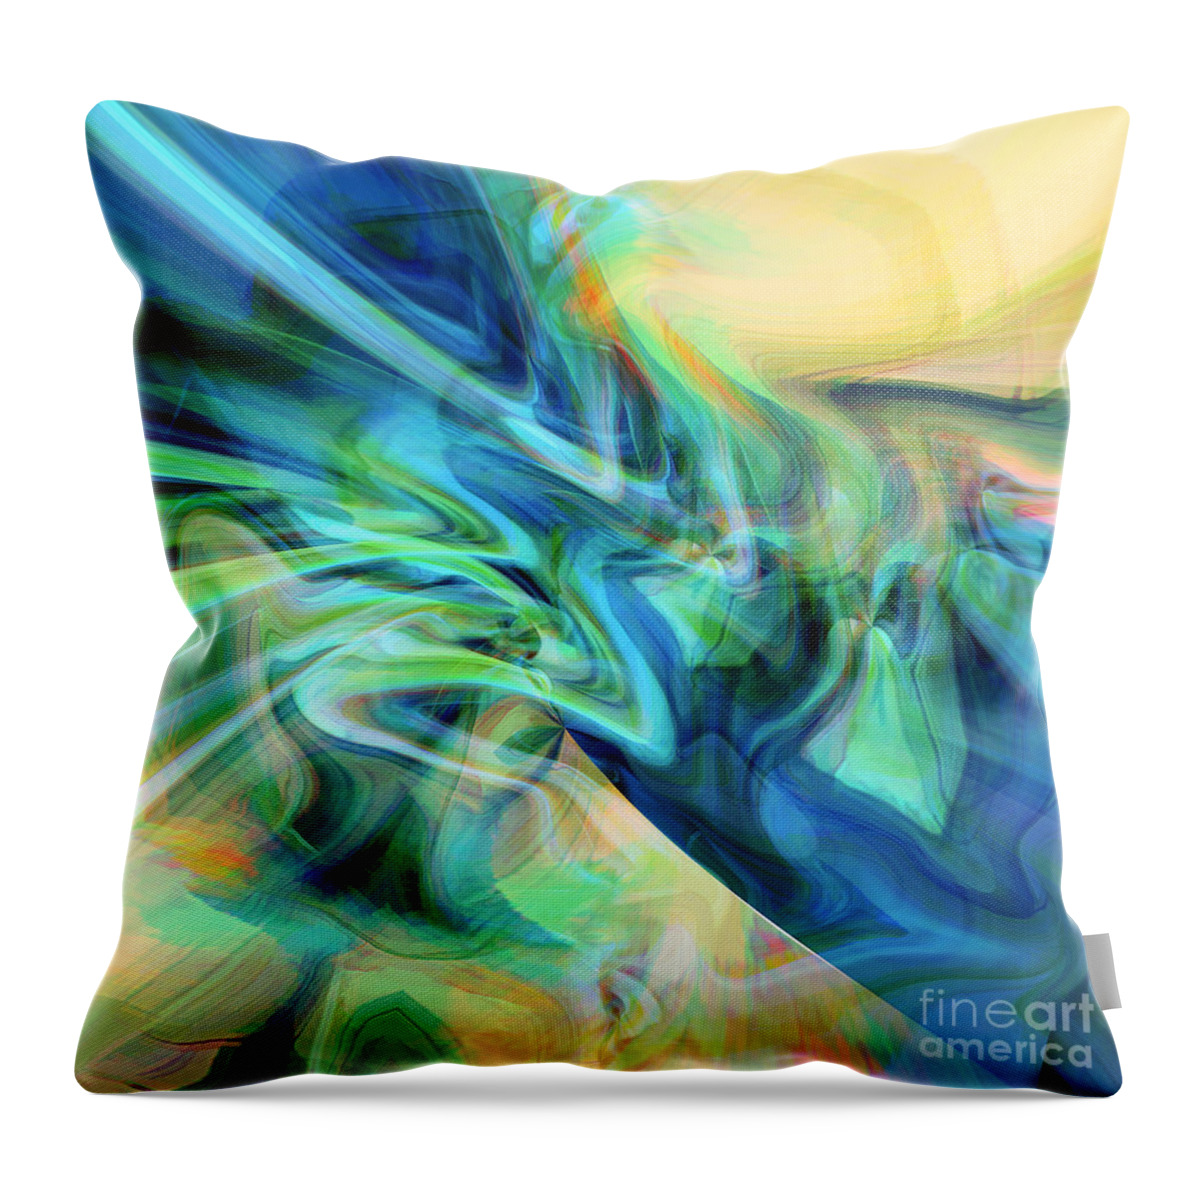 Bright Yellow Throw Pillow featuring the digital art New Day by Margie Chapman